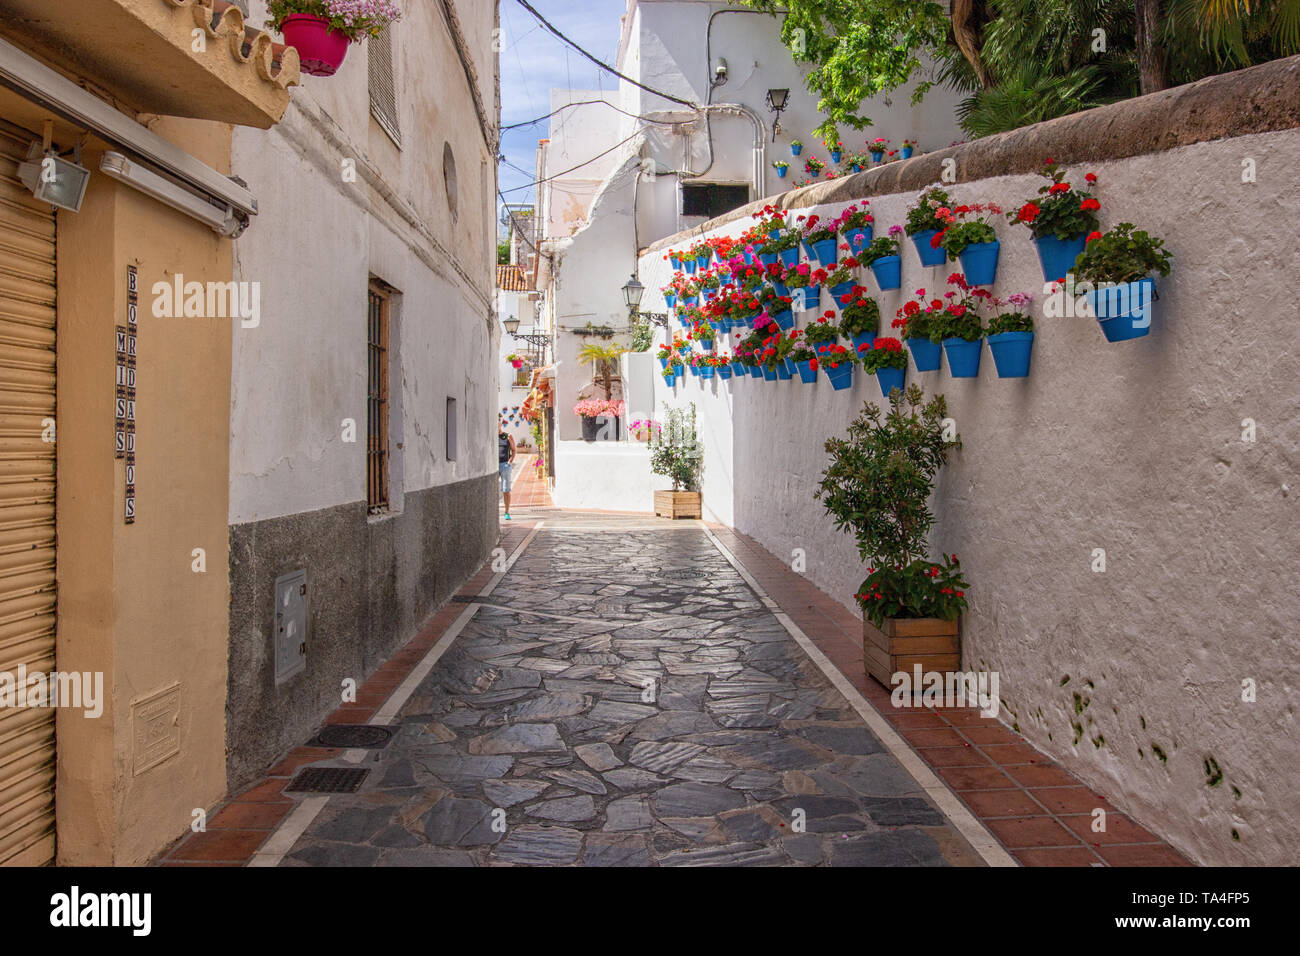 A traditional Spanish street with cobbled road and flowers on the wall in summer Stock Photo